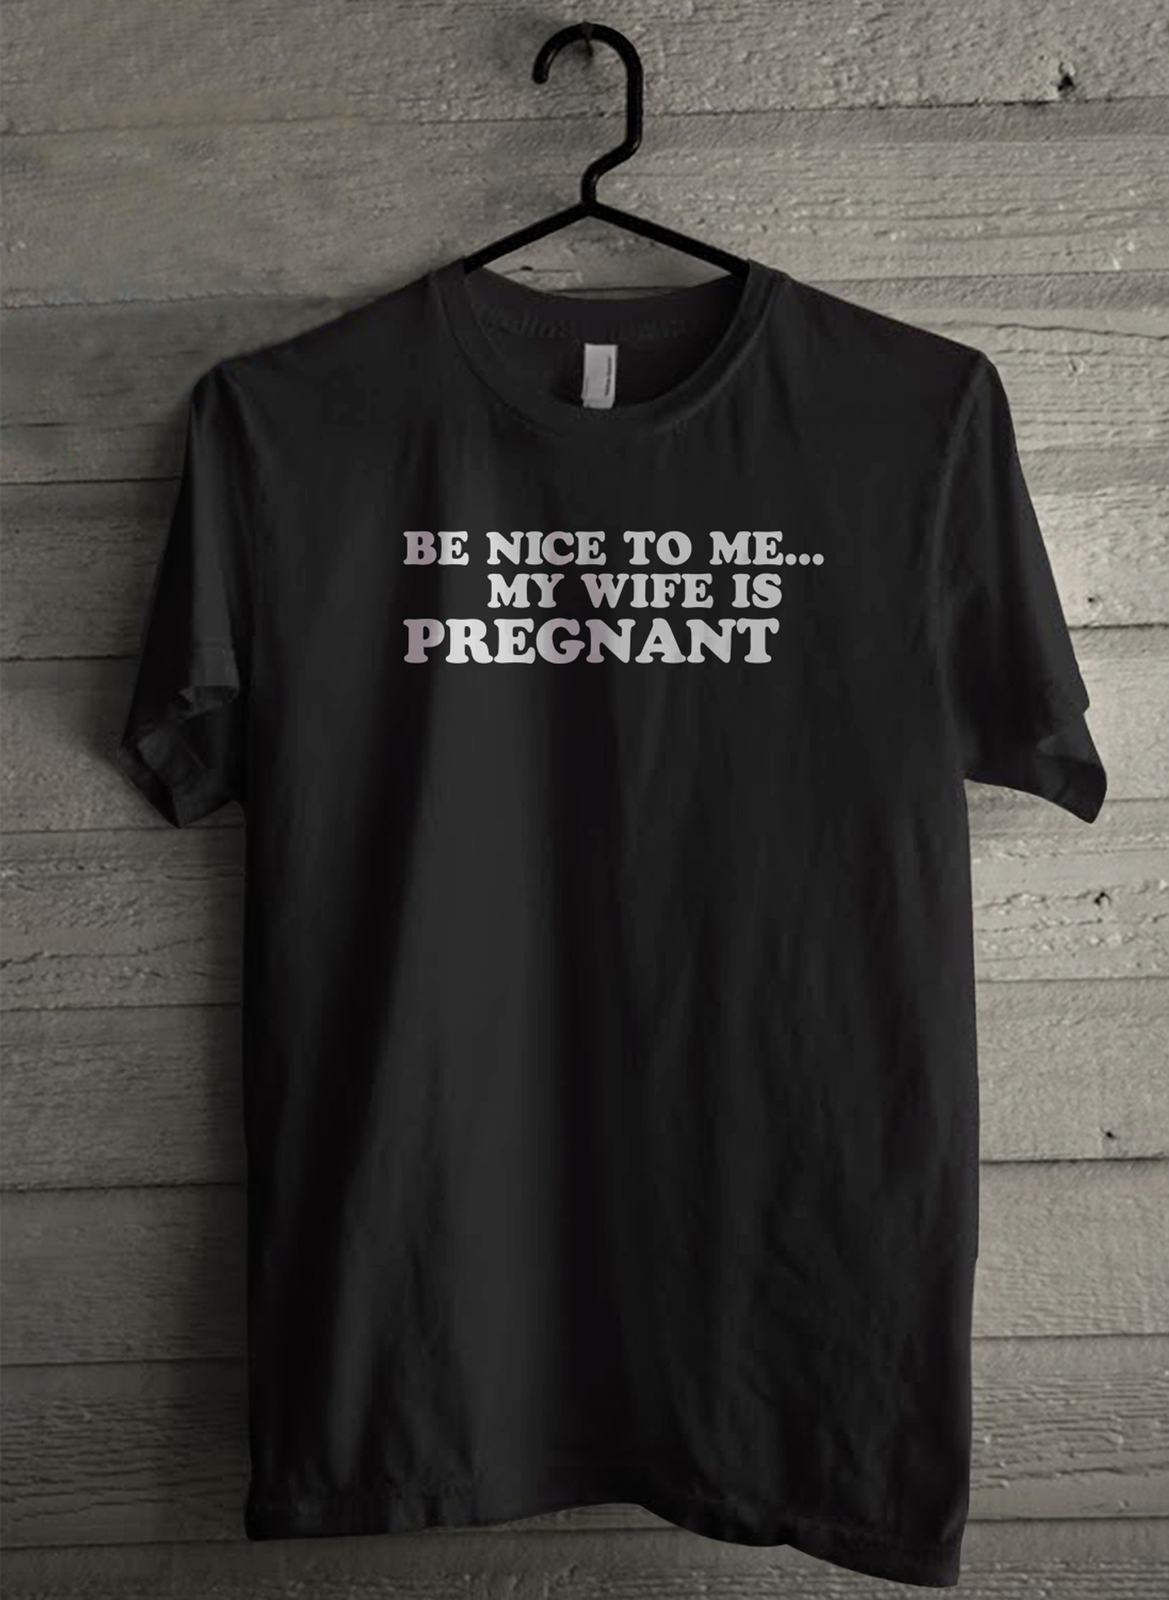 Be nice to me my wife is pregnant Men's T-Shirt - Custom (3023) - $19.12 - $21.82